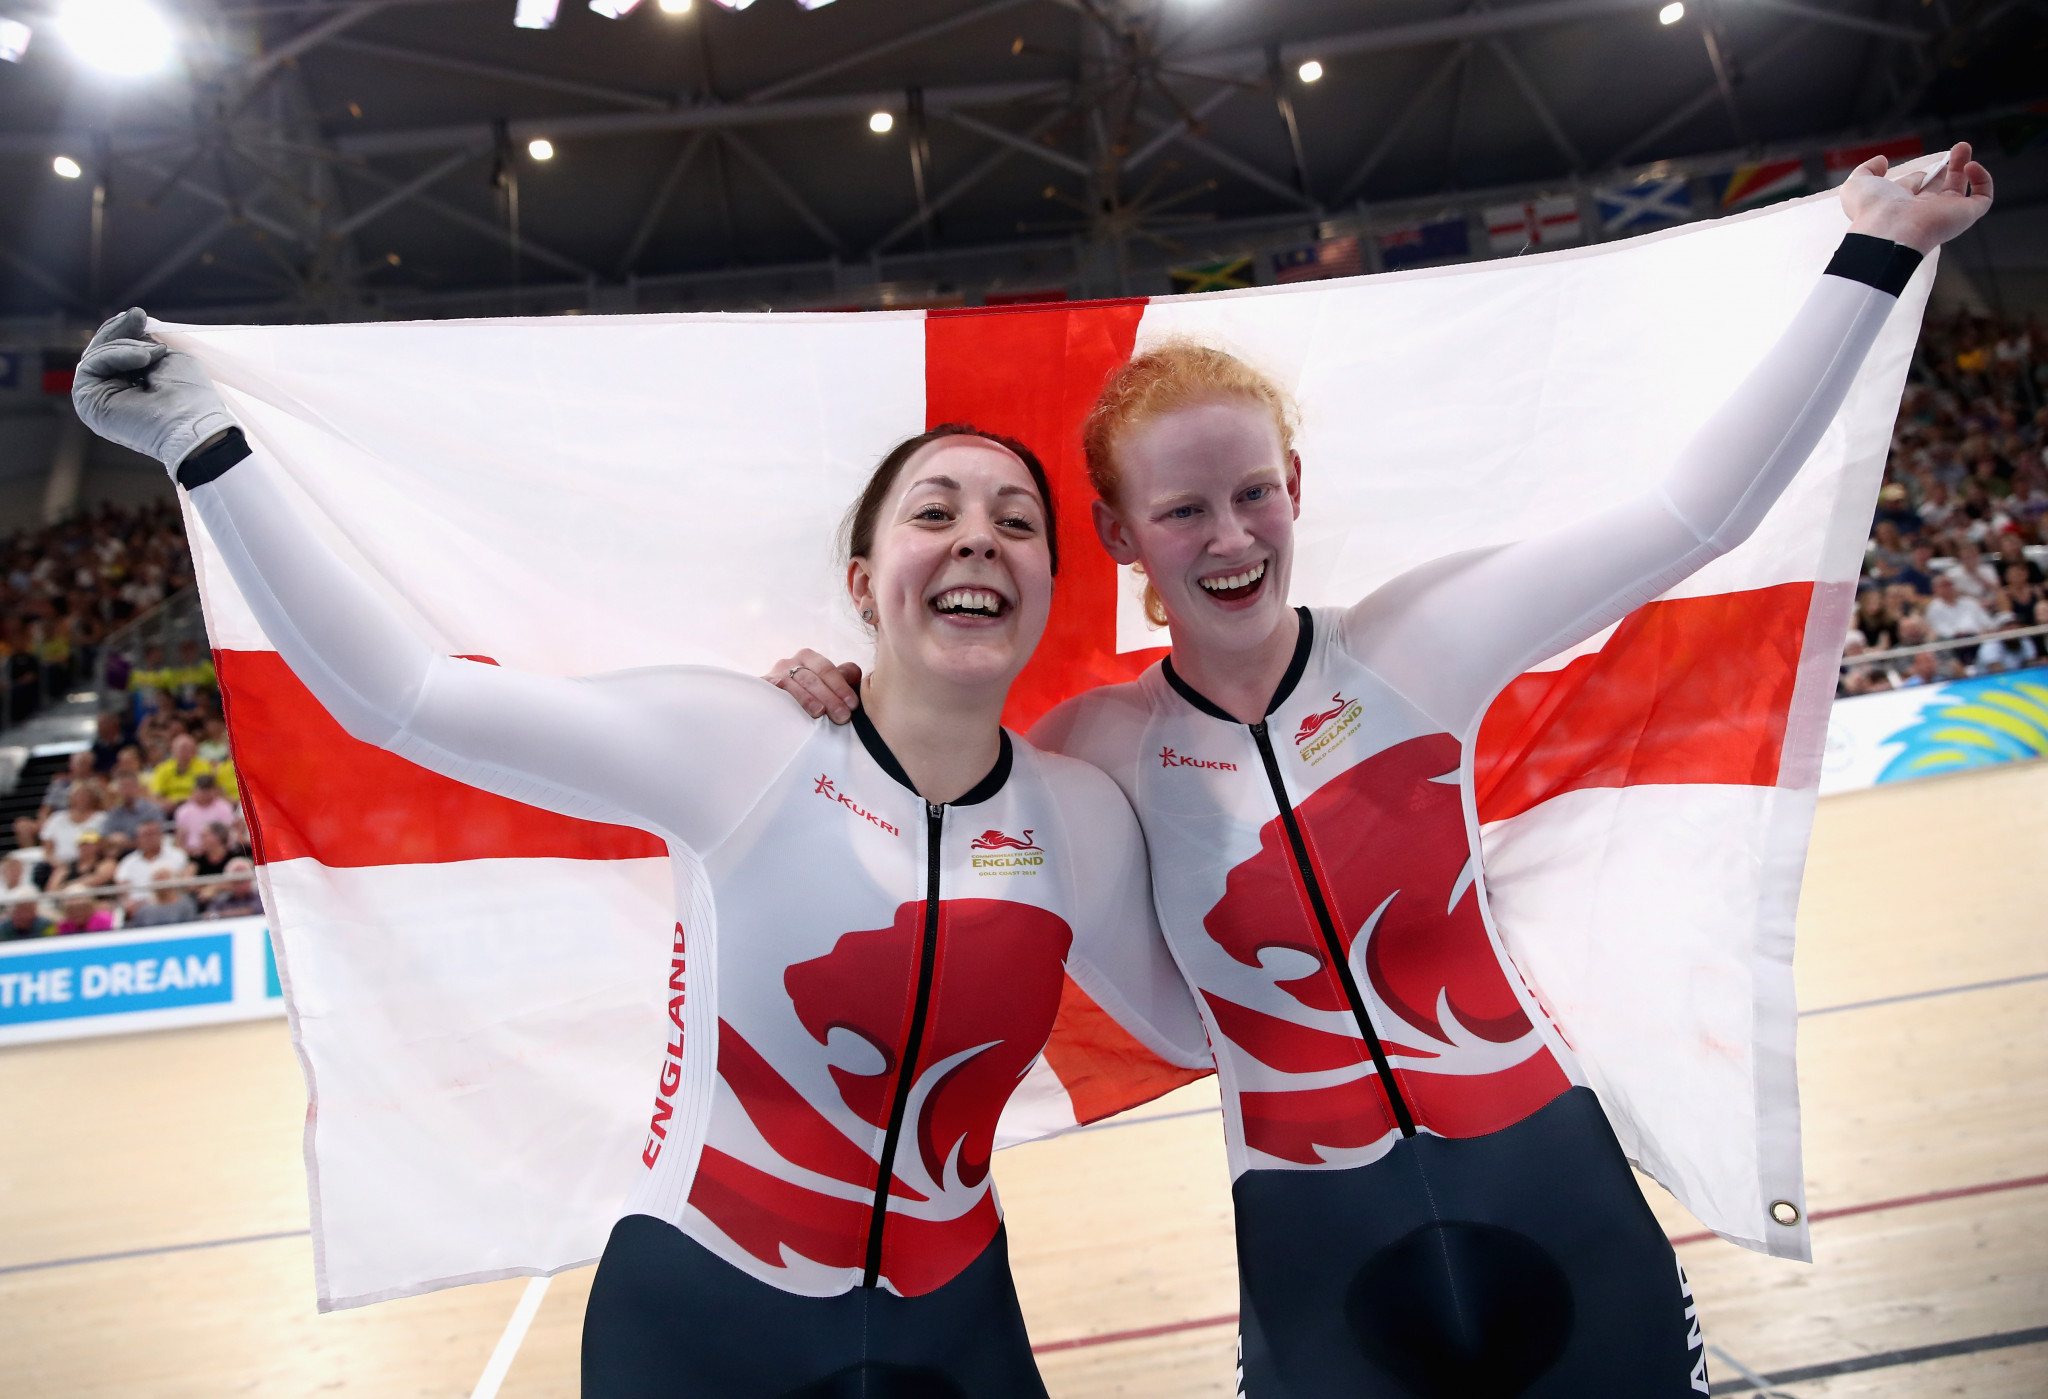 Helen Scott, left, partnered with Sophie Thornhill, right, to win several gold medals, including at the 2018 Commonwealth Games in the Gold Coast ©Getty Images